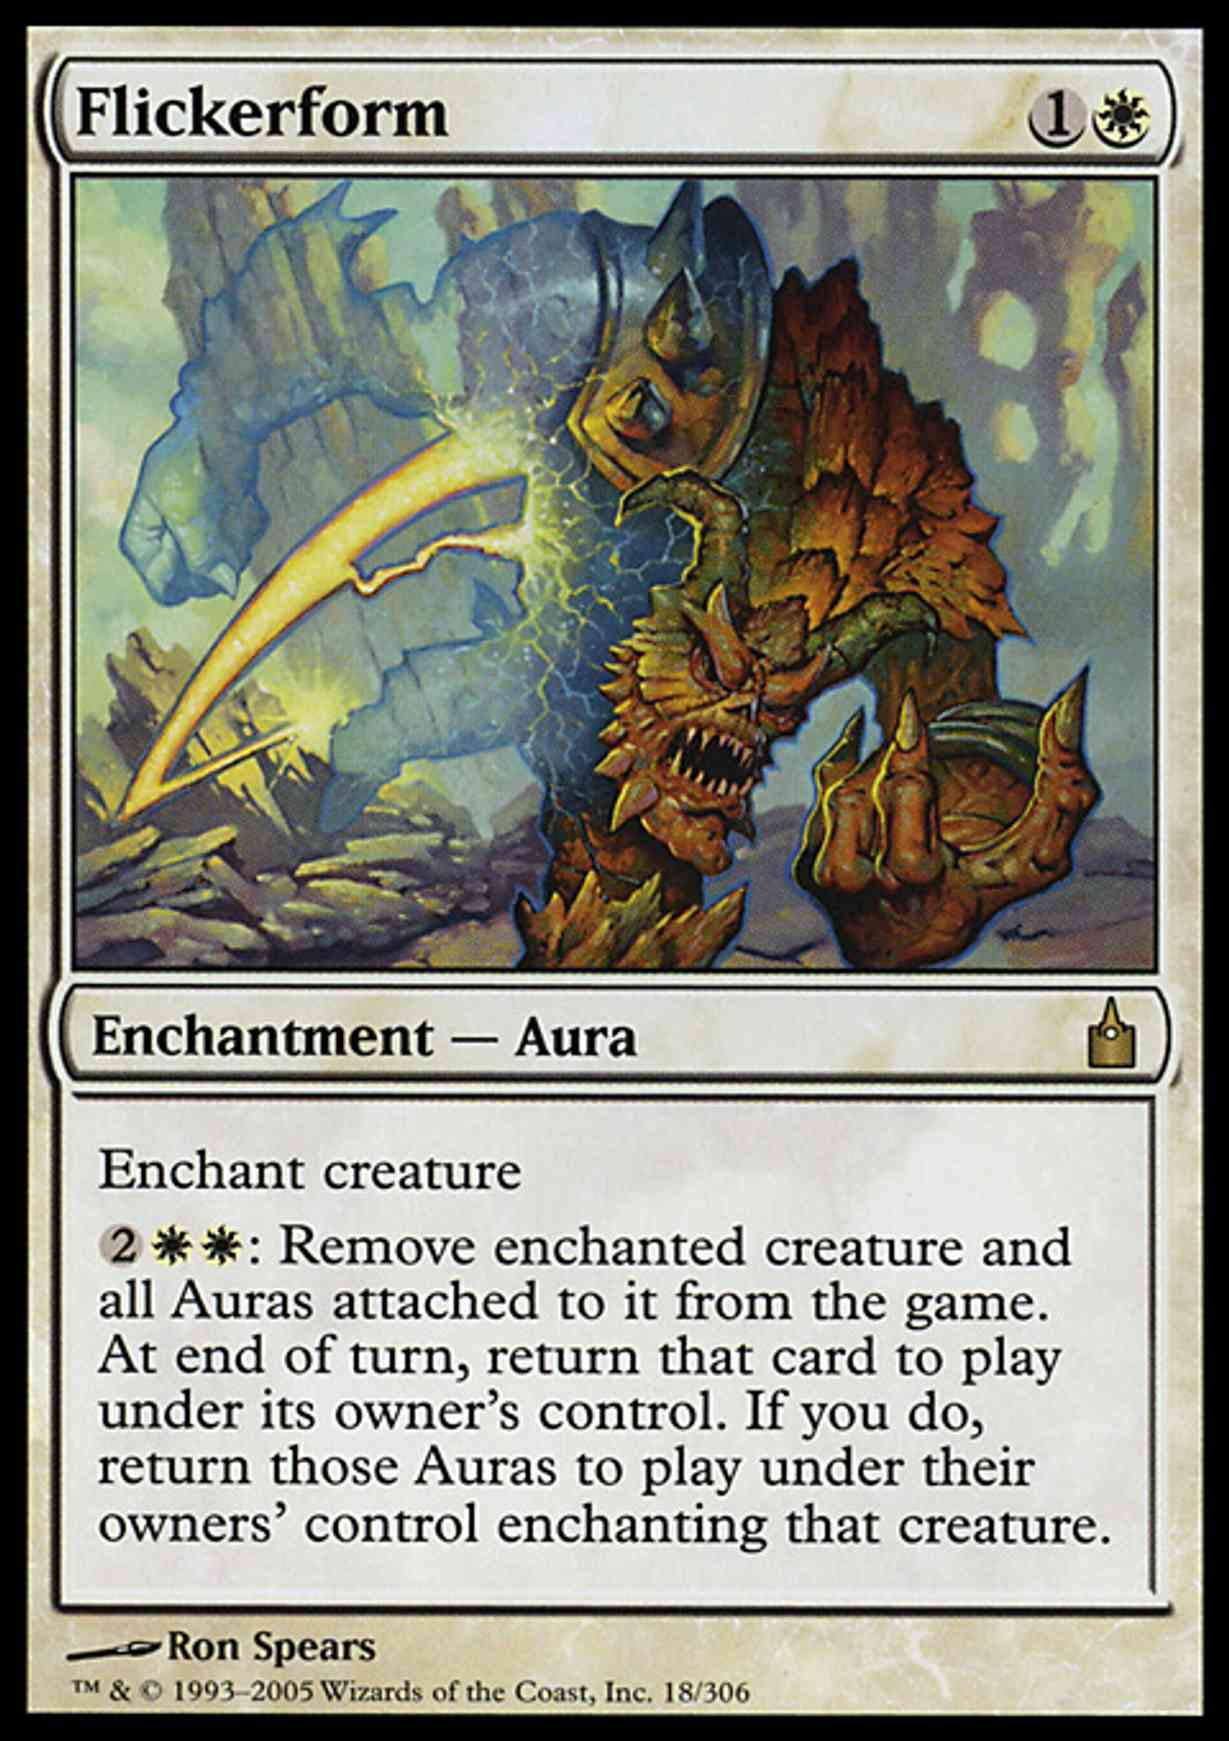 Flickerform magic card front